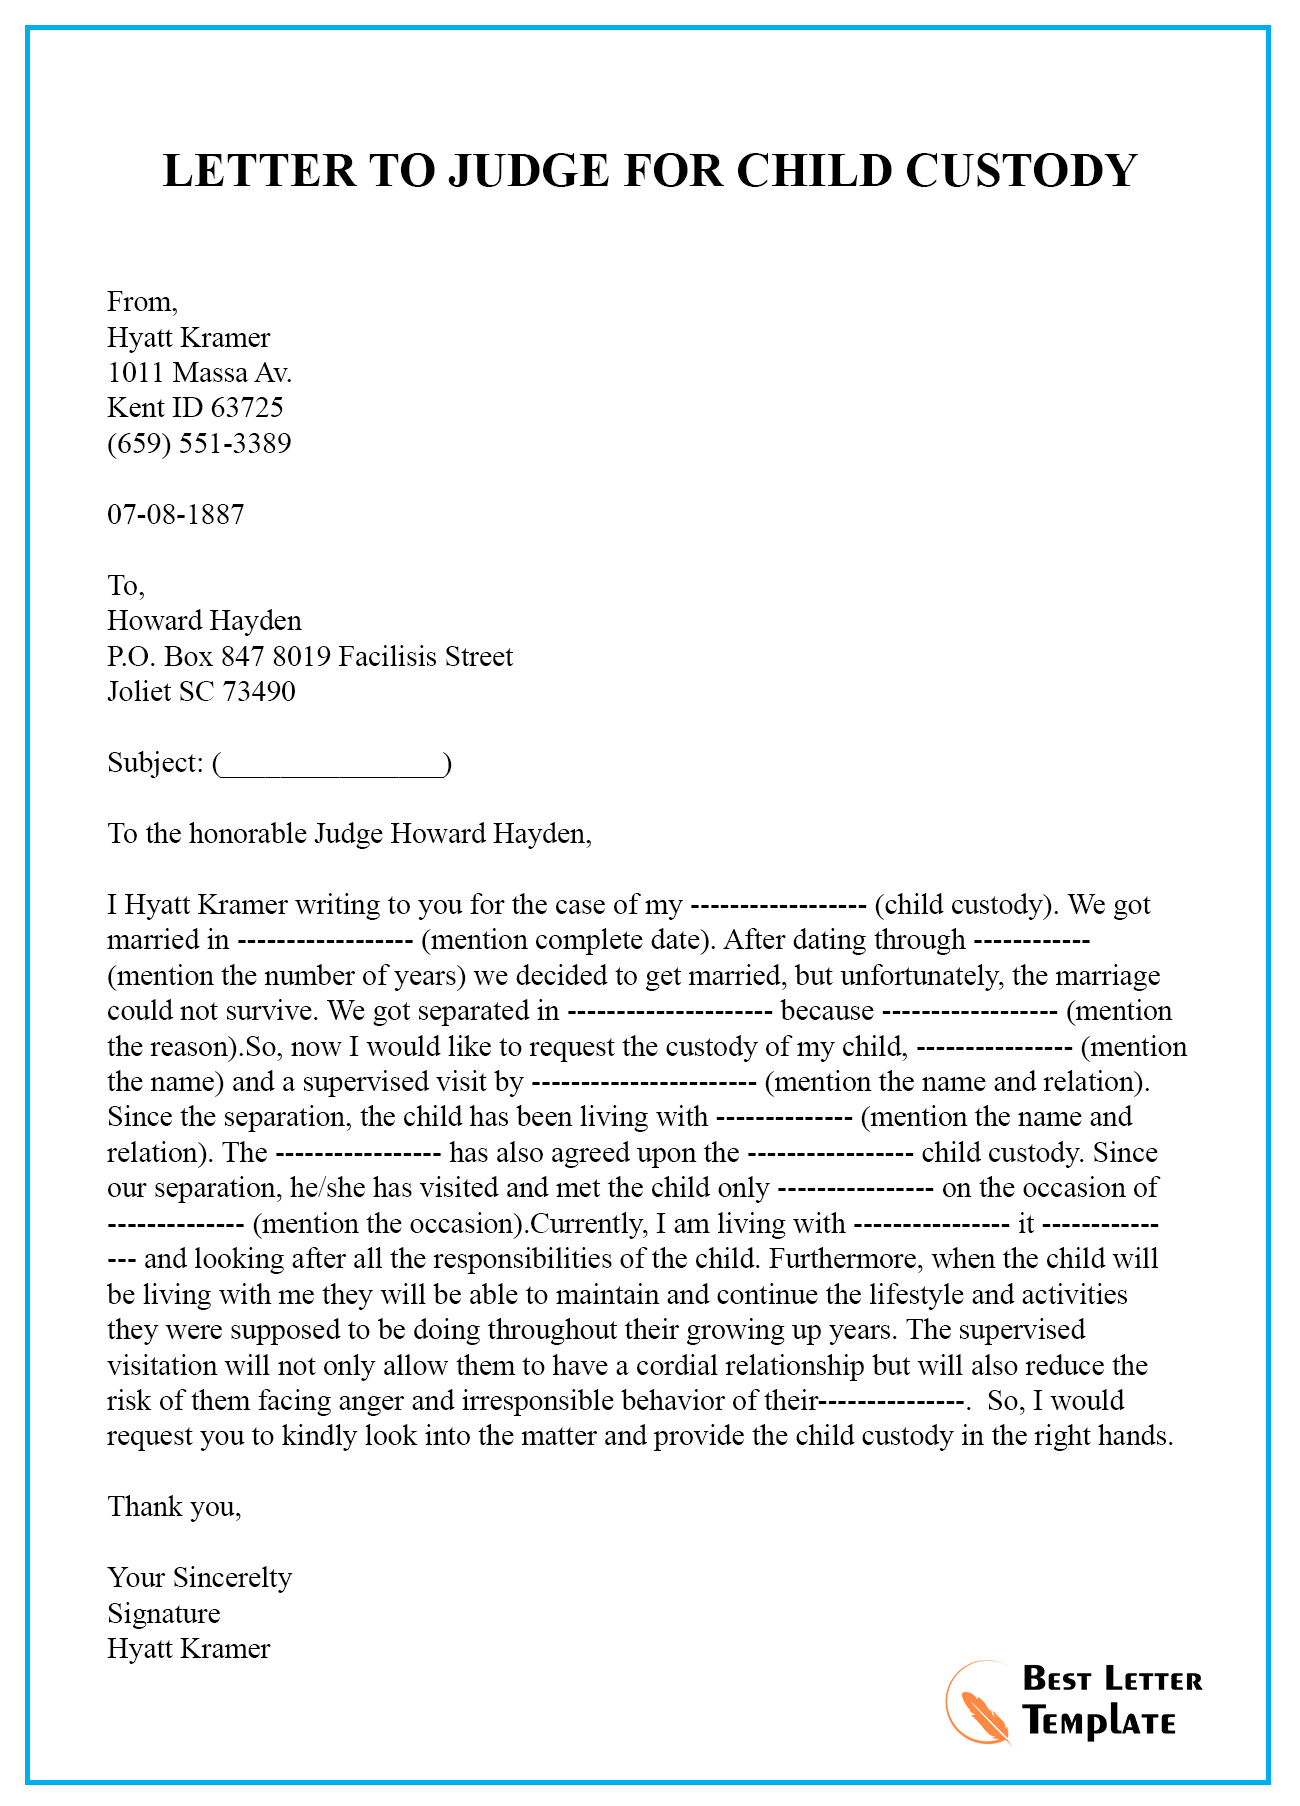 Sample Letter To Judge For Child Custody | Best Letter Template Pertaining To How To Write A Letter To A Judge Template